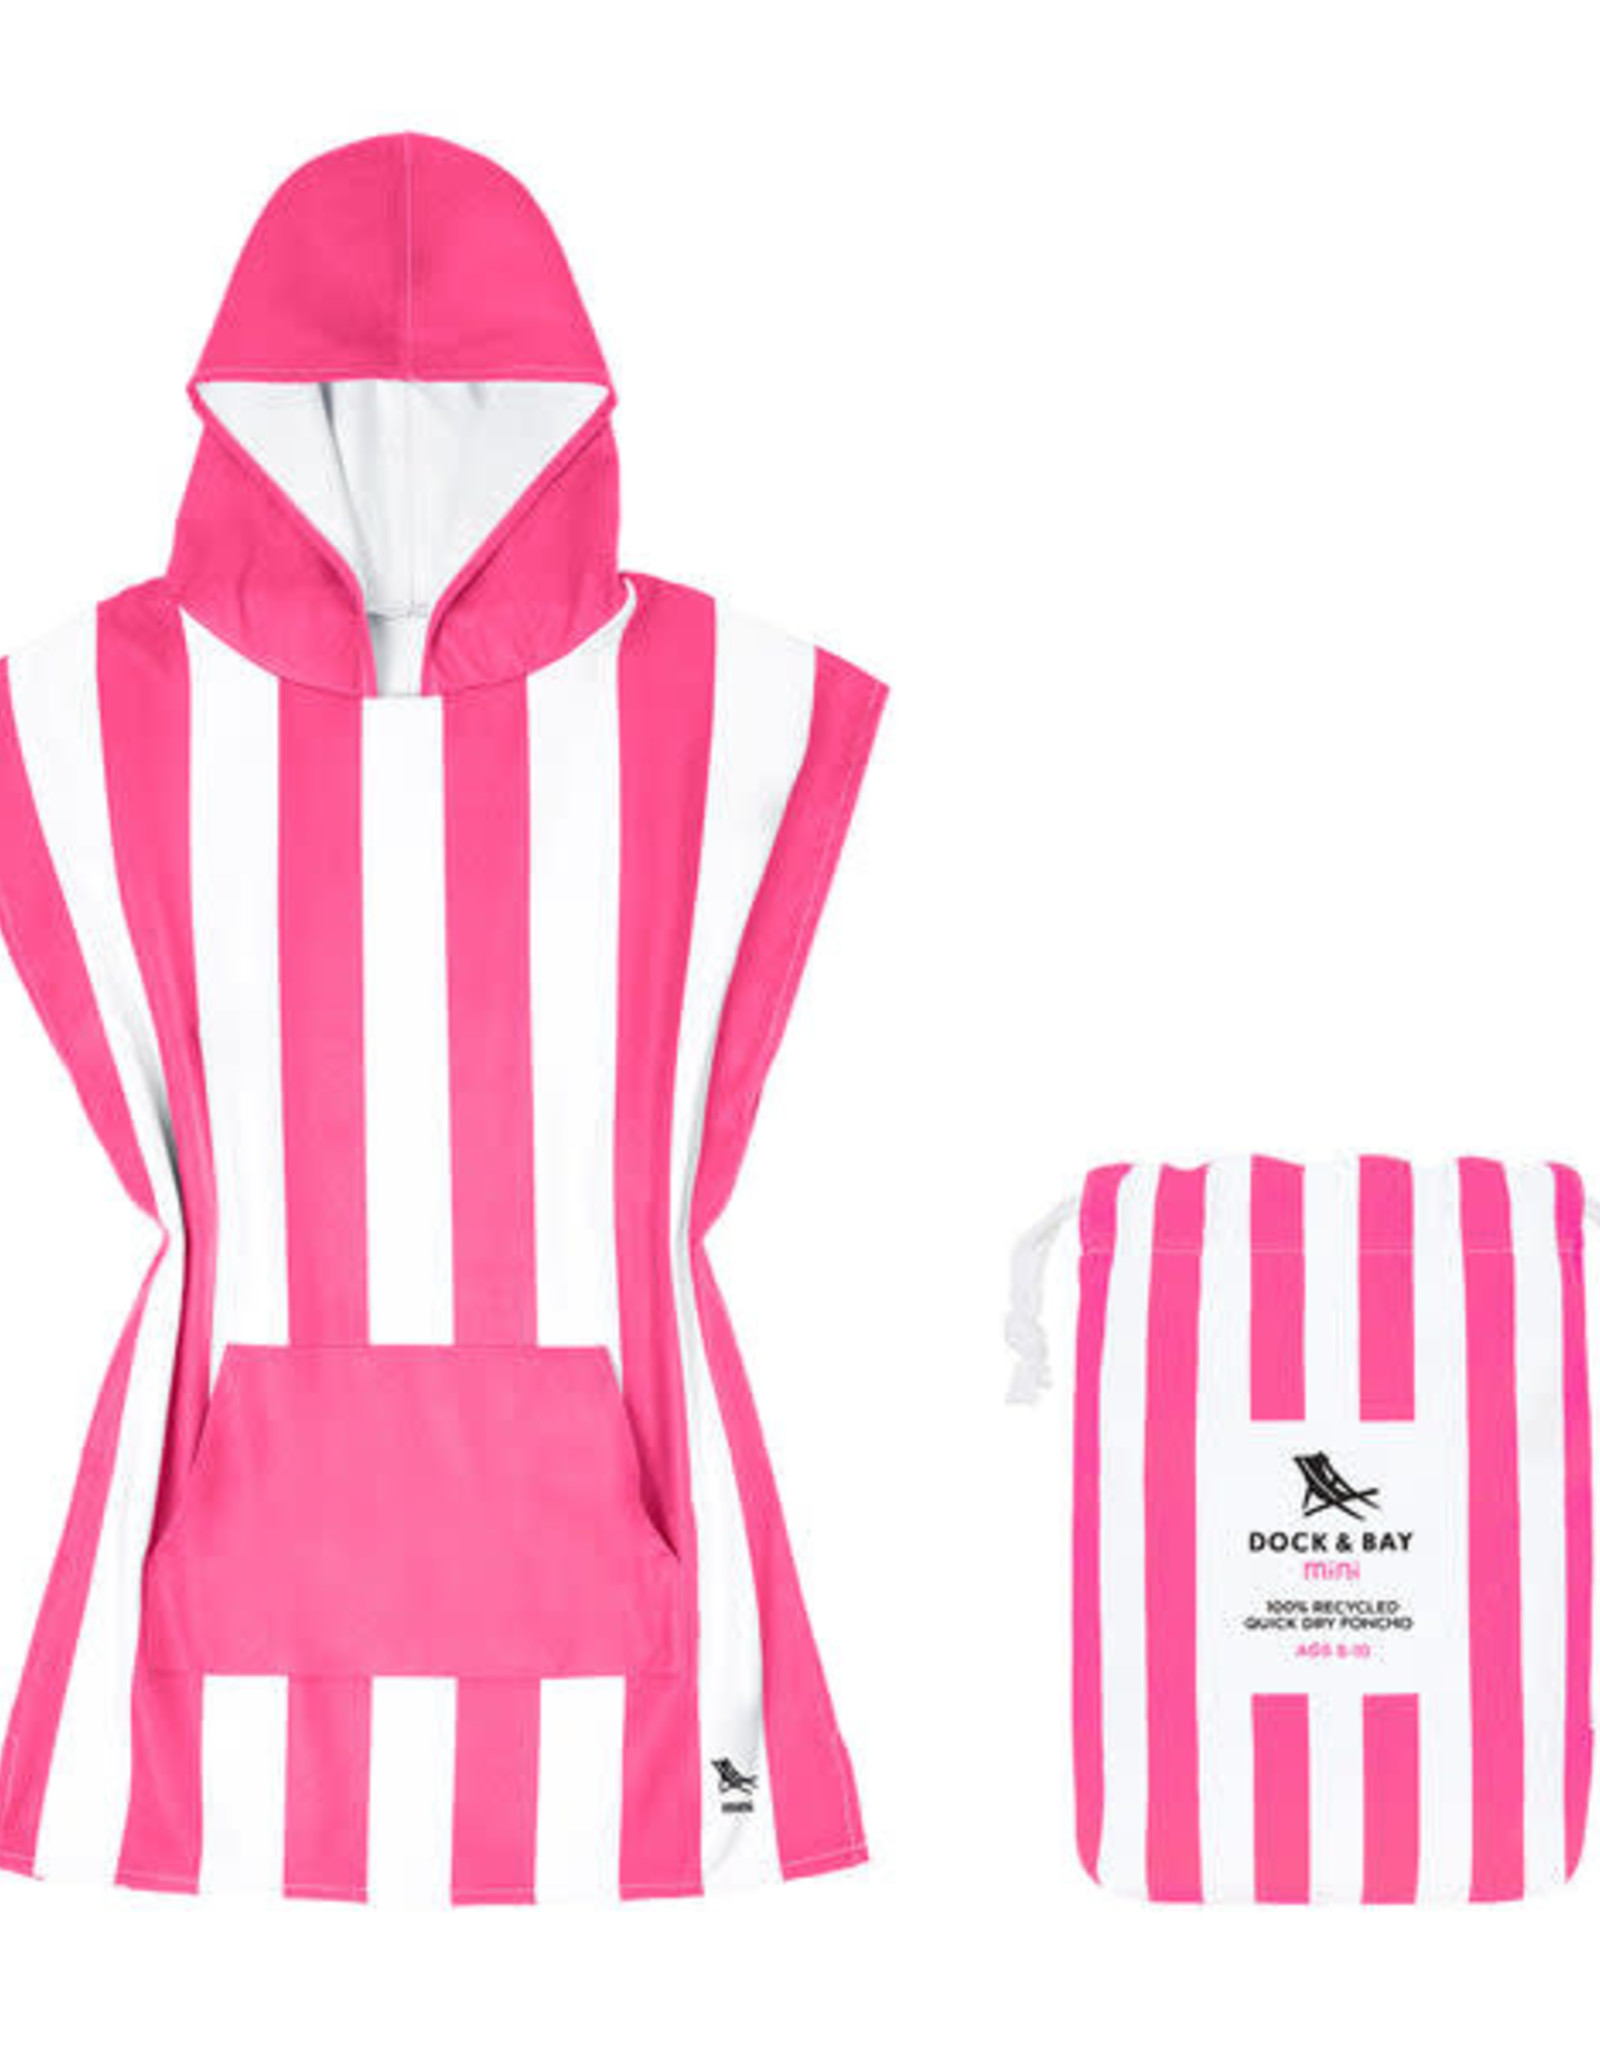 Dock & Bay Quick Dry Hooded Towel Hot Pink